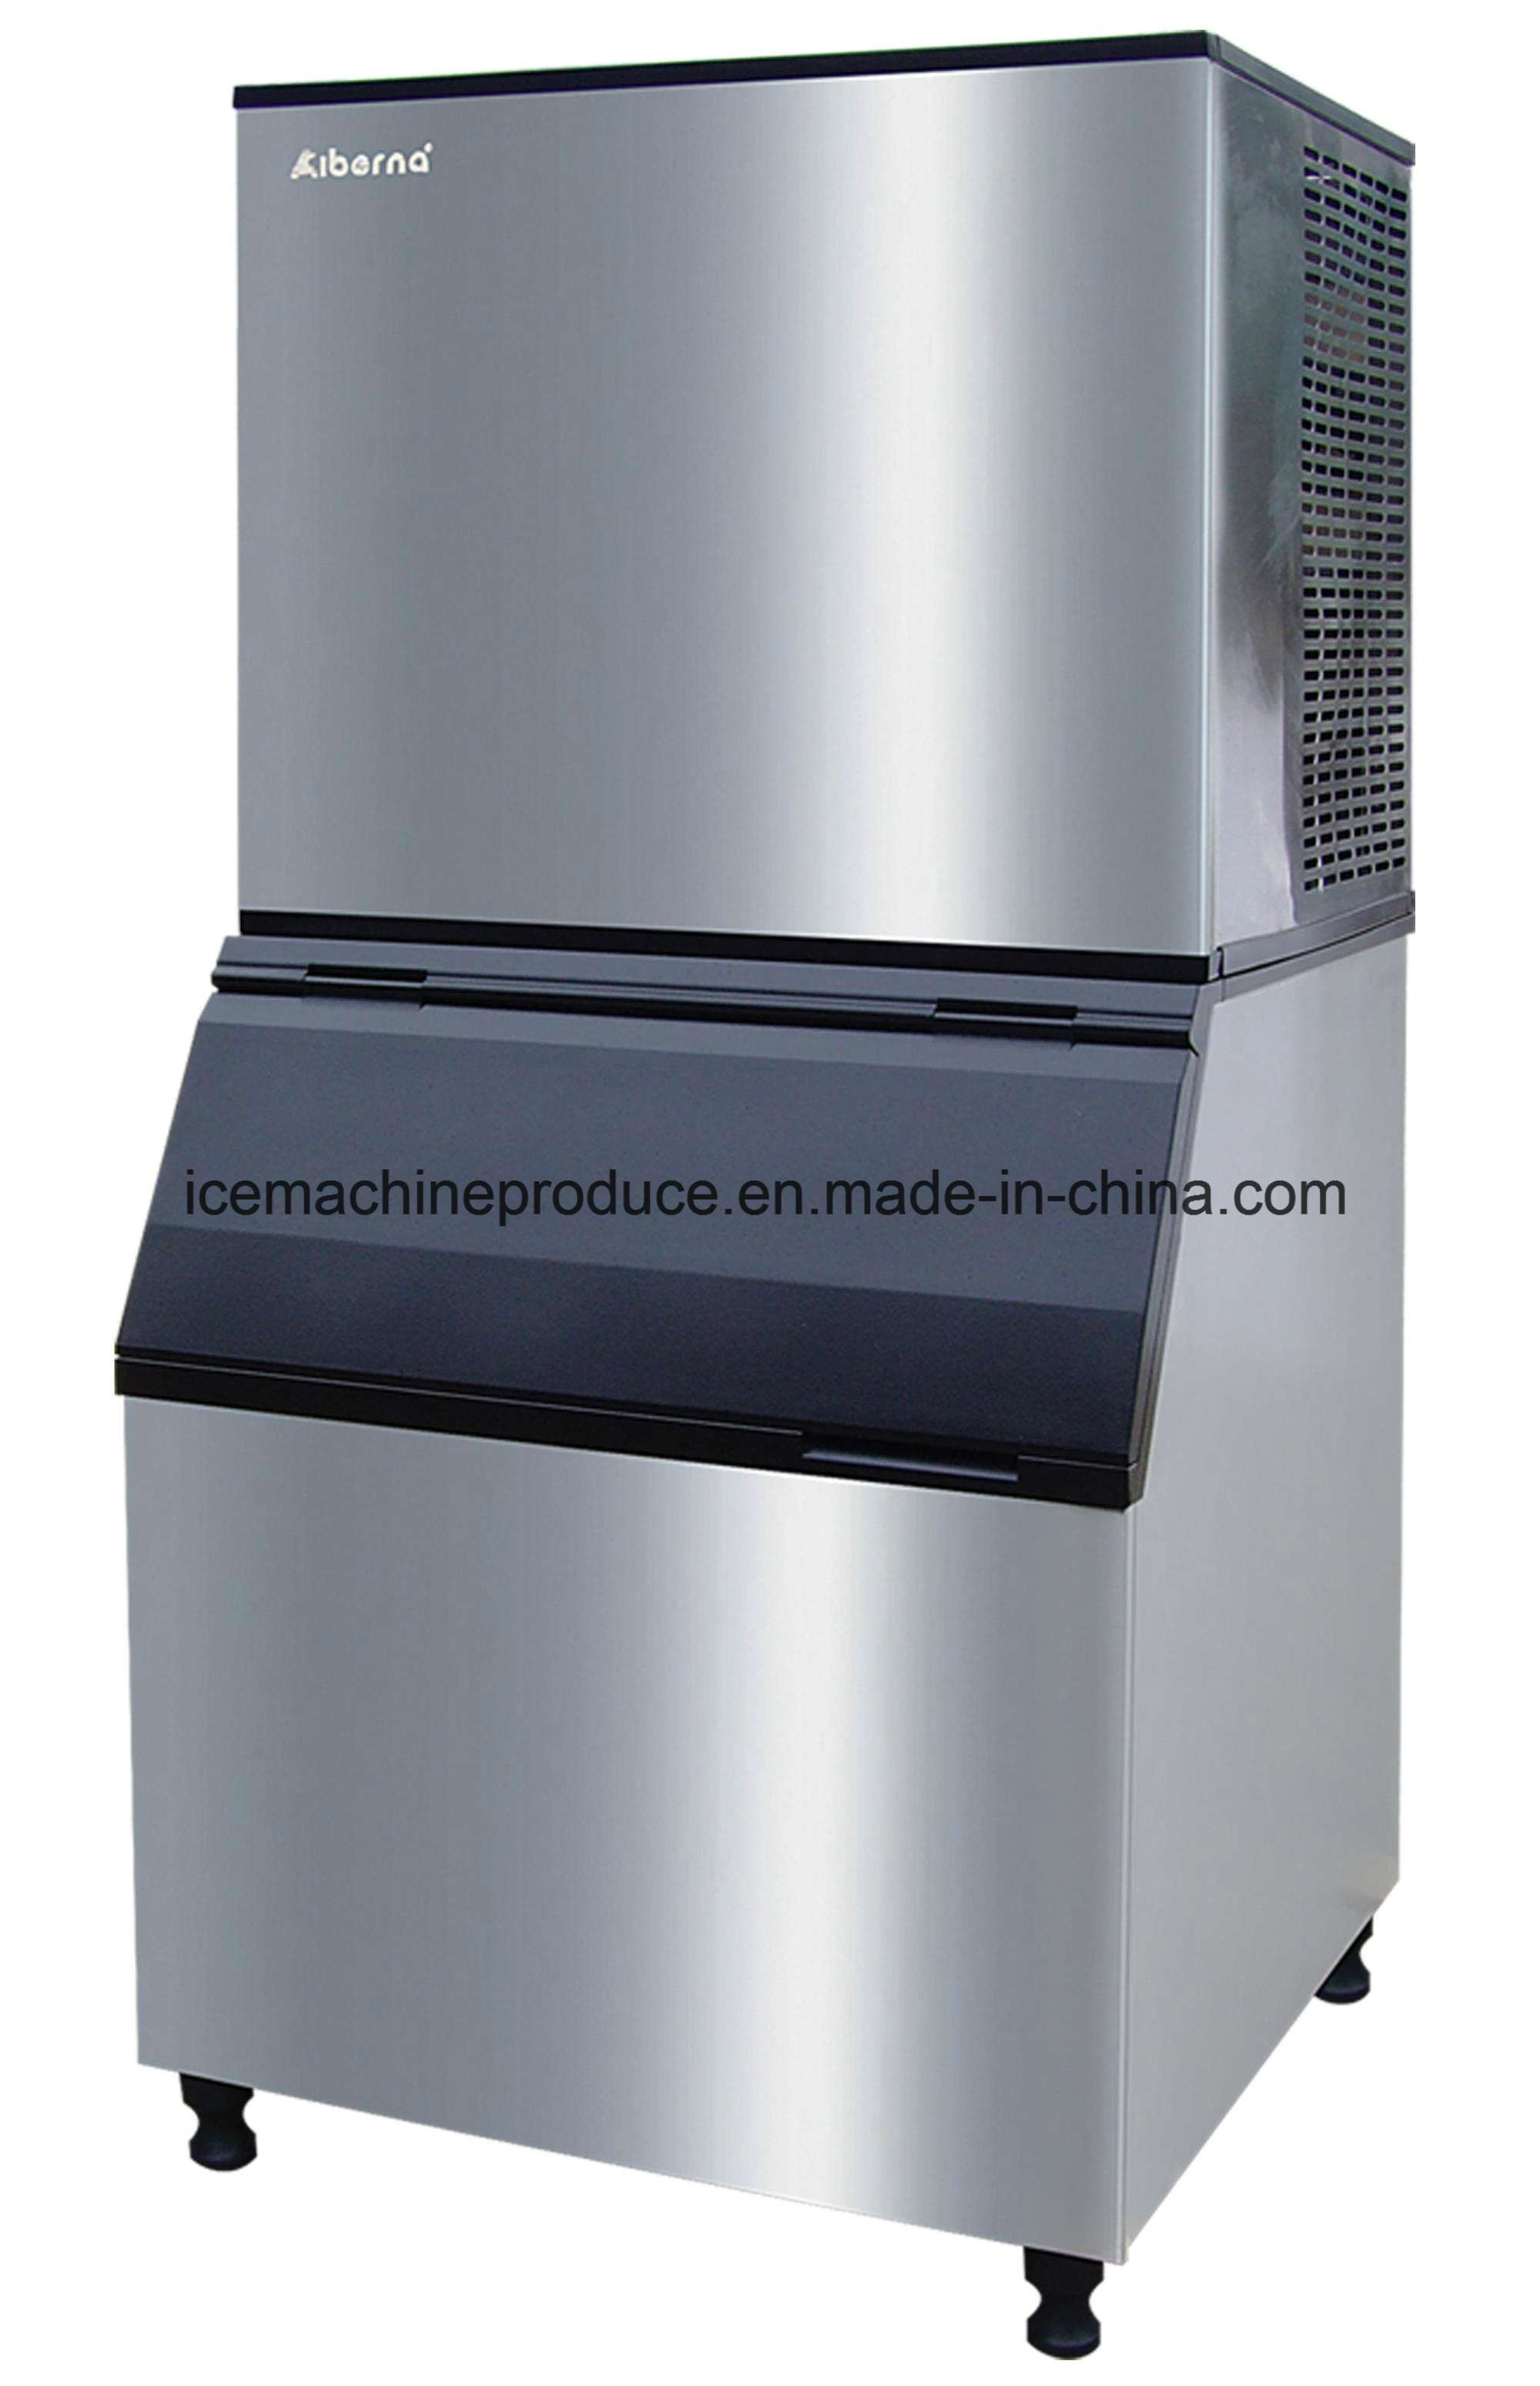 250 Kilogram Ice Making Machine Suitable for The Tropical Environment